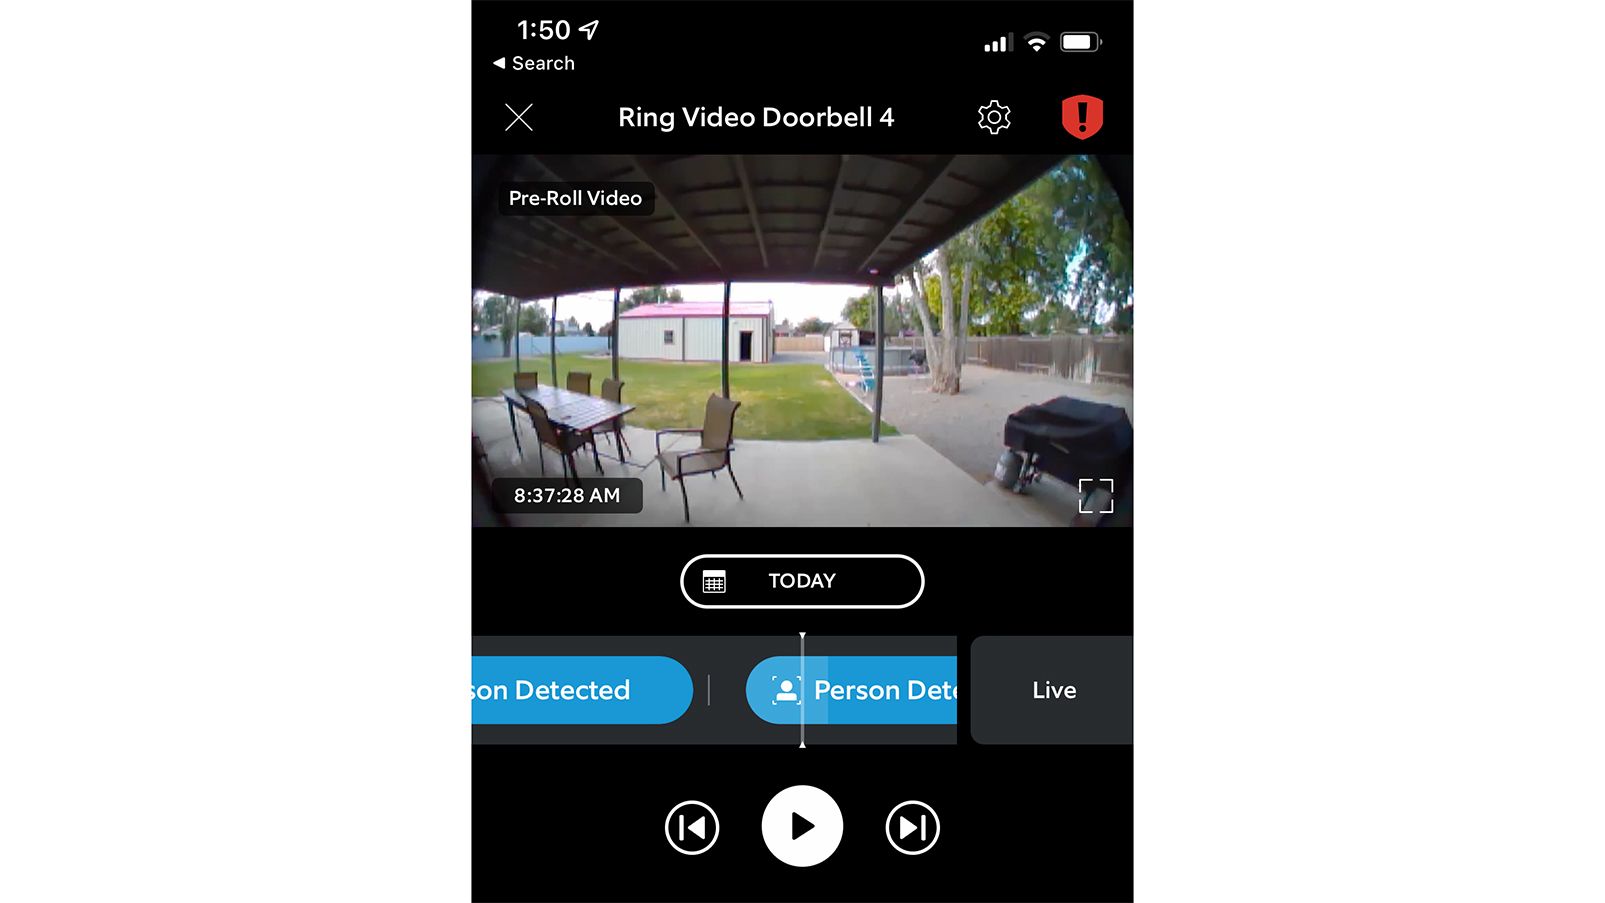 Ring Video Doorbell 4 Review: Minor Upgrades to an Already Decent